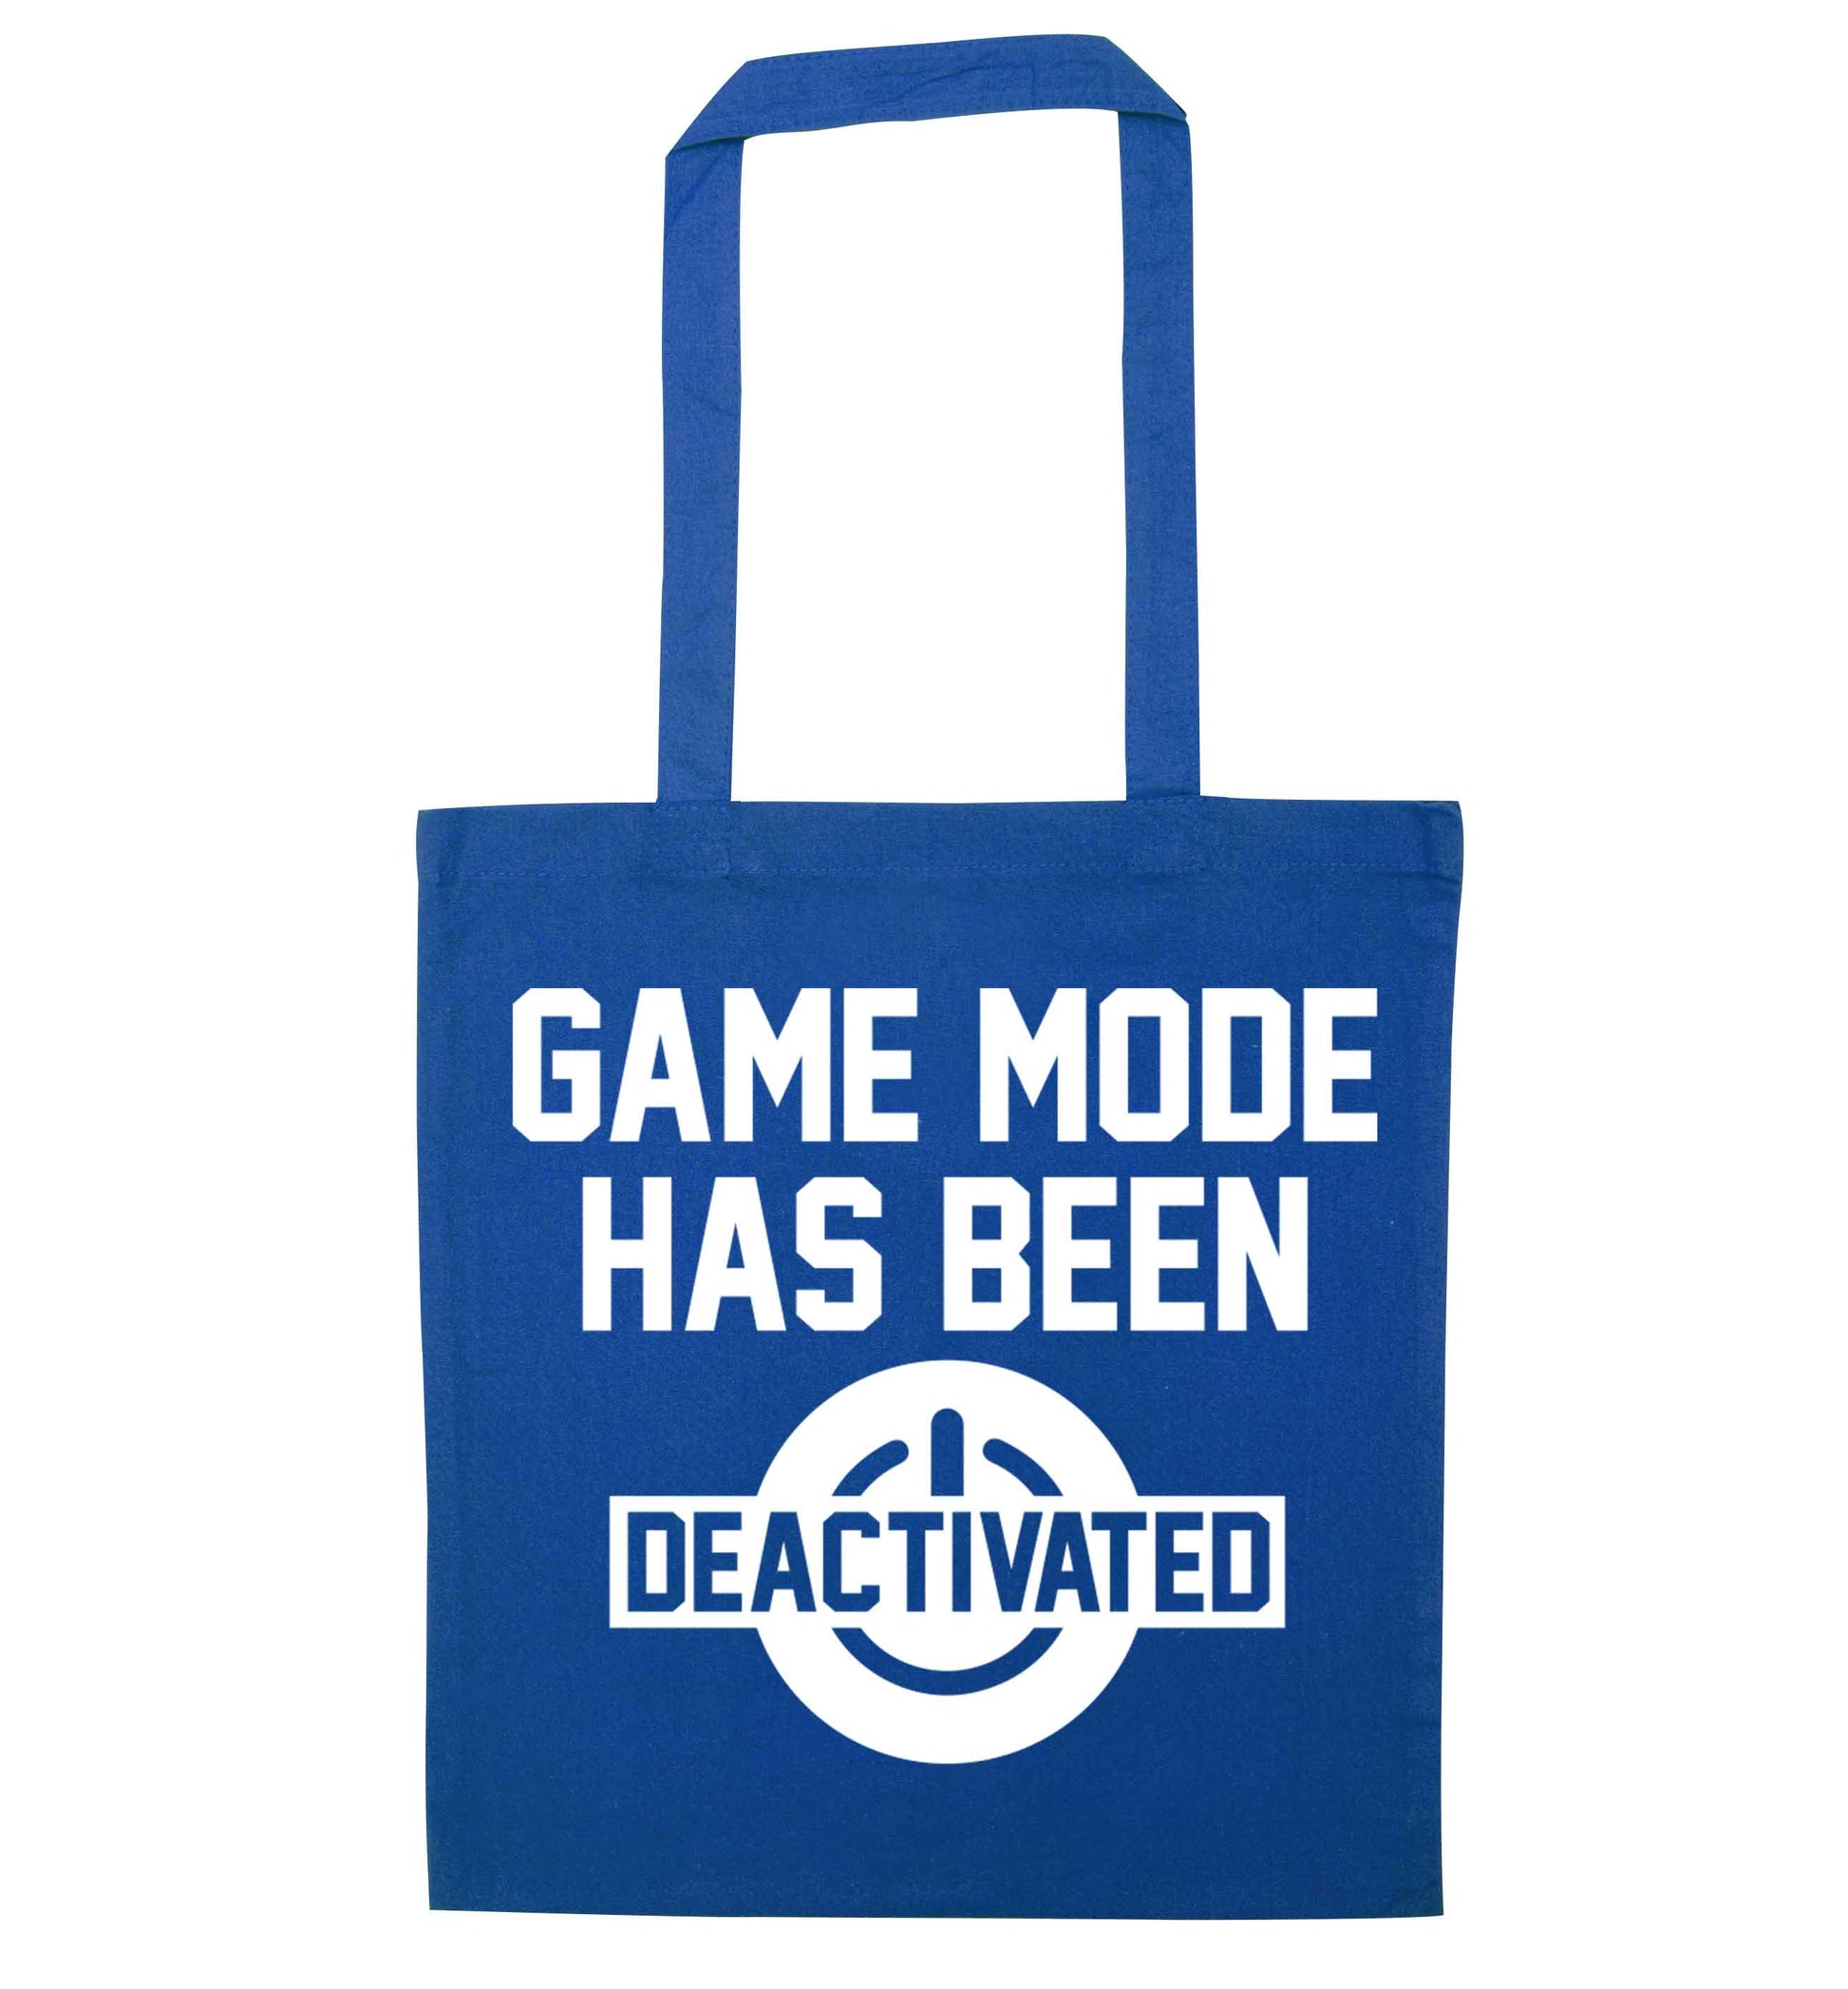 Game Mode Has Been Deactivated blue tote bag